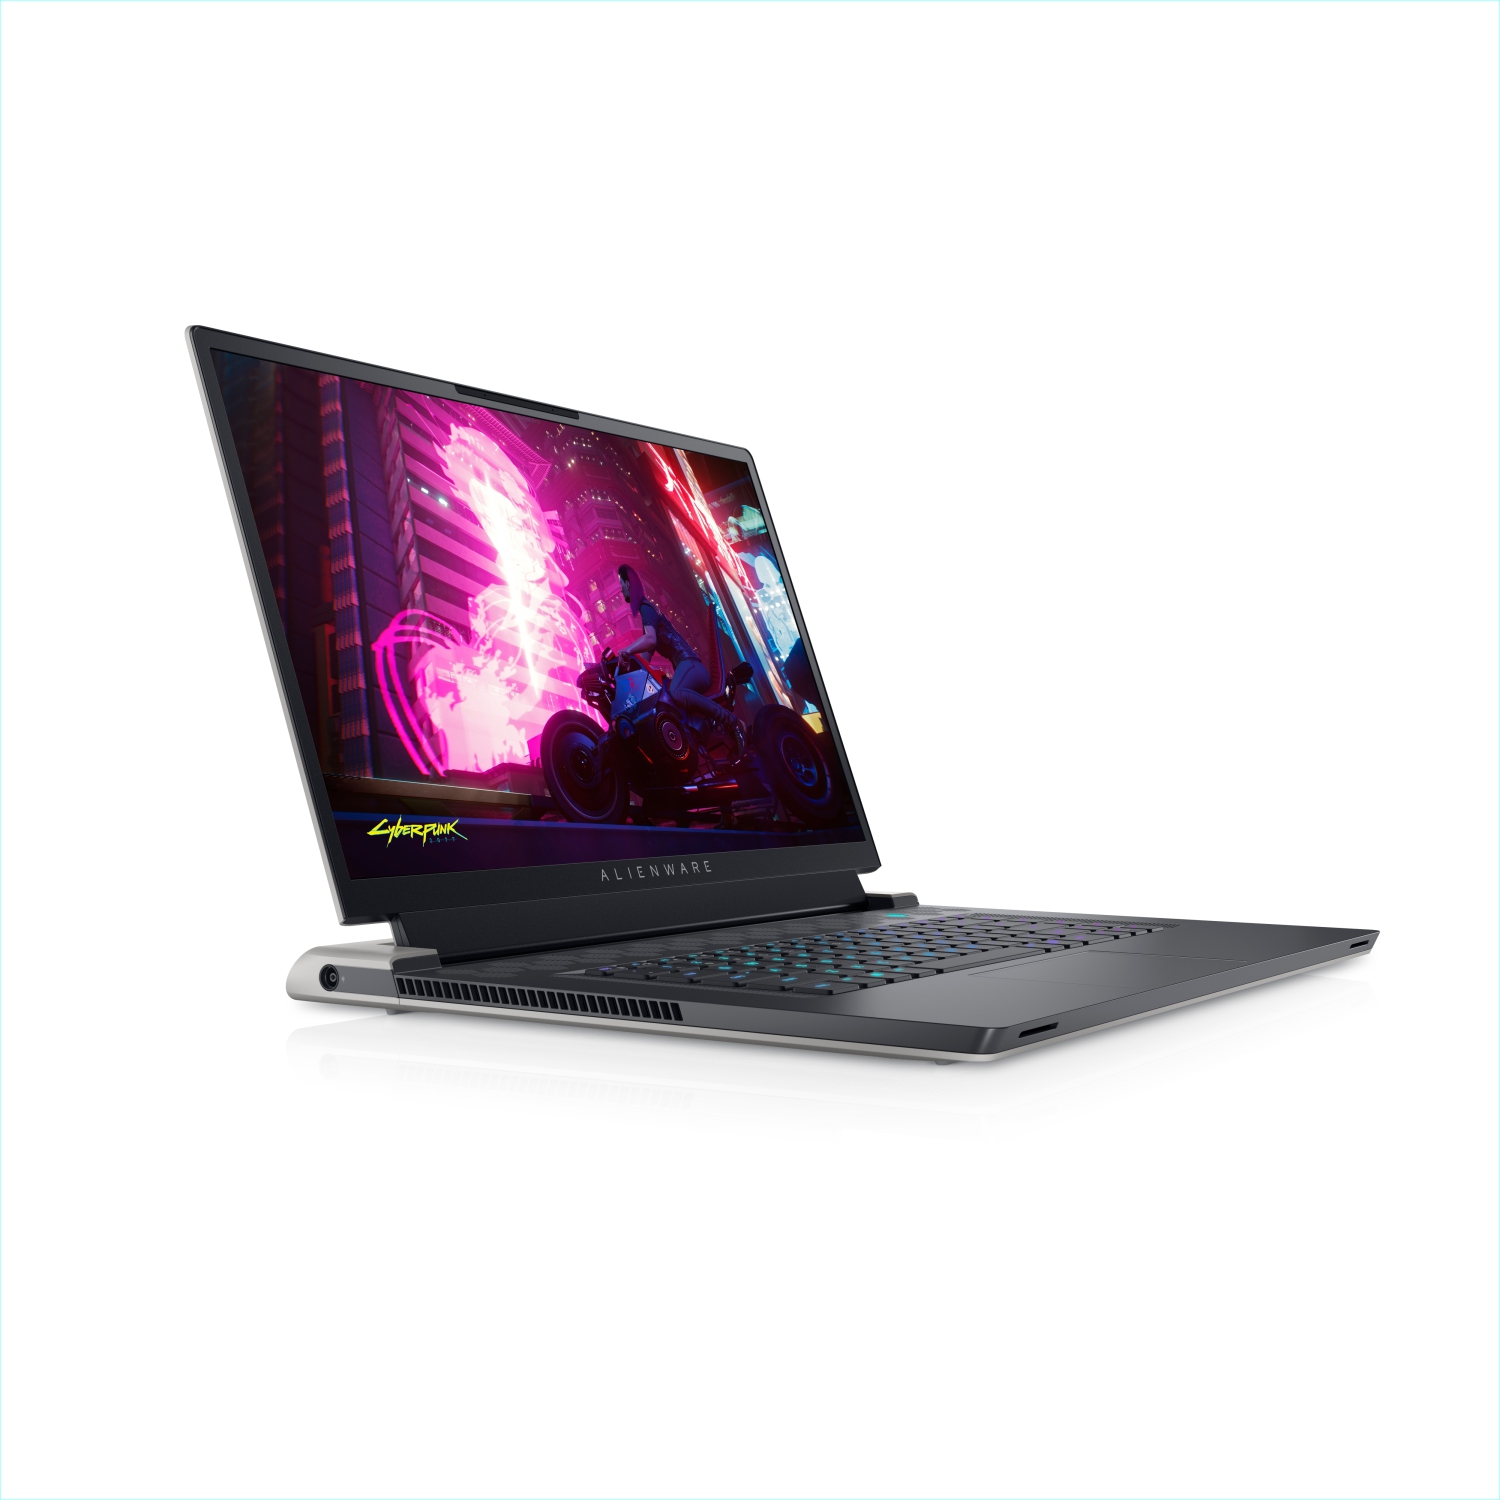 Dell Alienware X17 R1 Gaming Laptop (2021) | 17.3" FHD | Core i7 - 1TB SSD + 512GB SSD - 32GB RAM - RTX 3070 | 8 Cores @ 4.6 GHz - 11th Gen CPU - 8GB GDDR6 Certified Refurbished